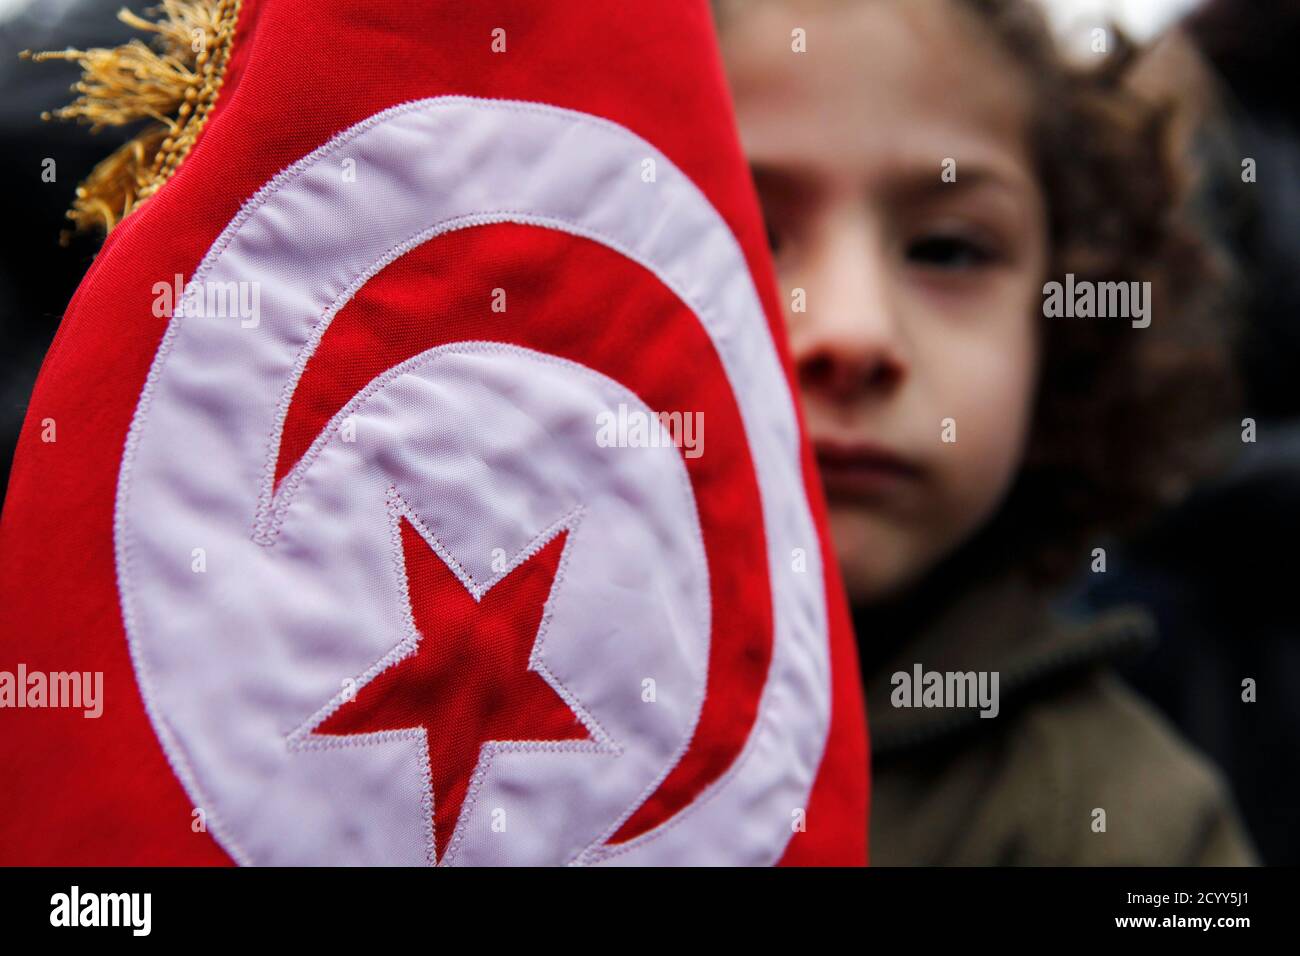 A girl holds a Tunisian flag during a sit-in organized by Lebanese activists and Tunisian people living in Lebanon, in front of the U.N headquarters in Beirut, to show support for the Tunisian people, January 16, 2011.Tunisia's new leadership moved to form a coalition government to gain the upper hand over violent looters and quell arson and shooting that broke out after President Zine al-Abidine Ben Ali was ousted by protests. REUTERS/ Cynthia Karam   (LEBANON - Tags: POLITICS) Stock Photo